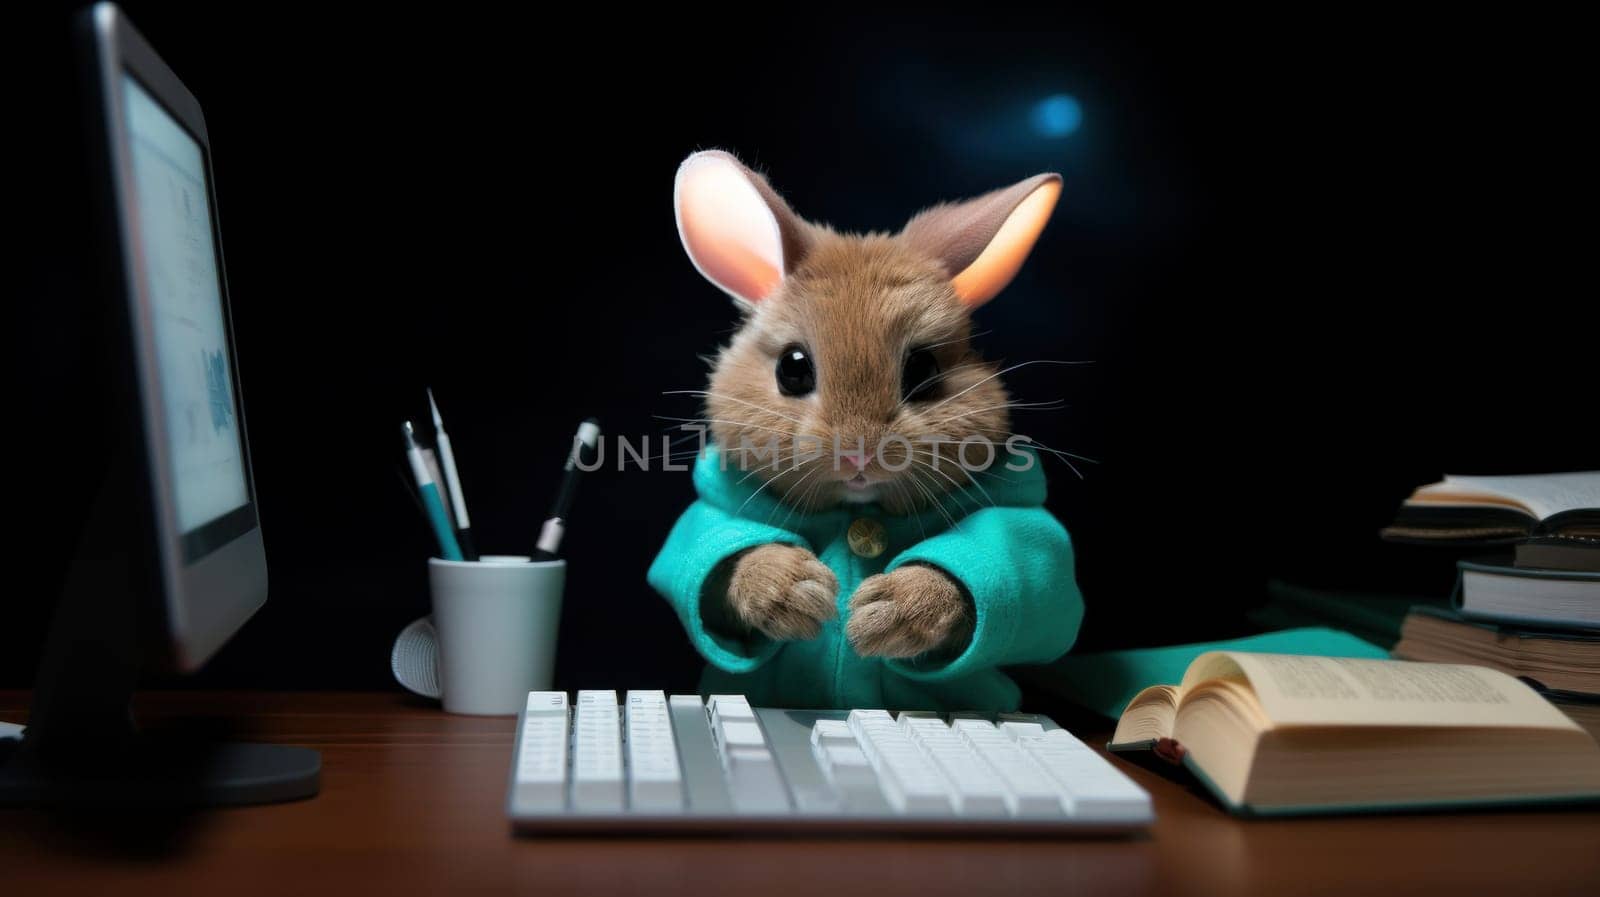 A brown rabbit wearing a green sweater sitting at the computer